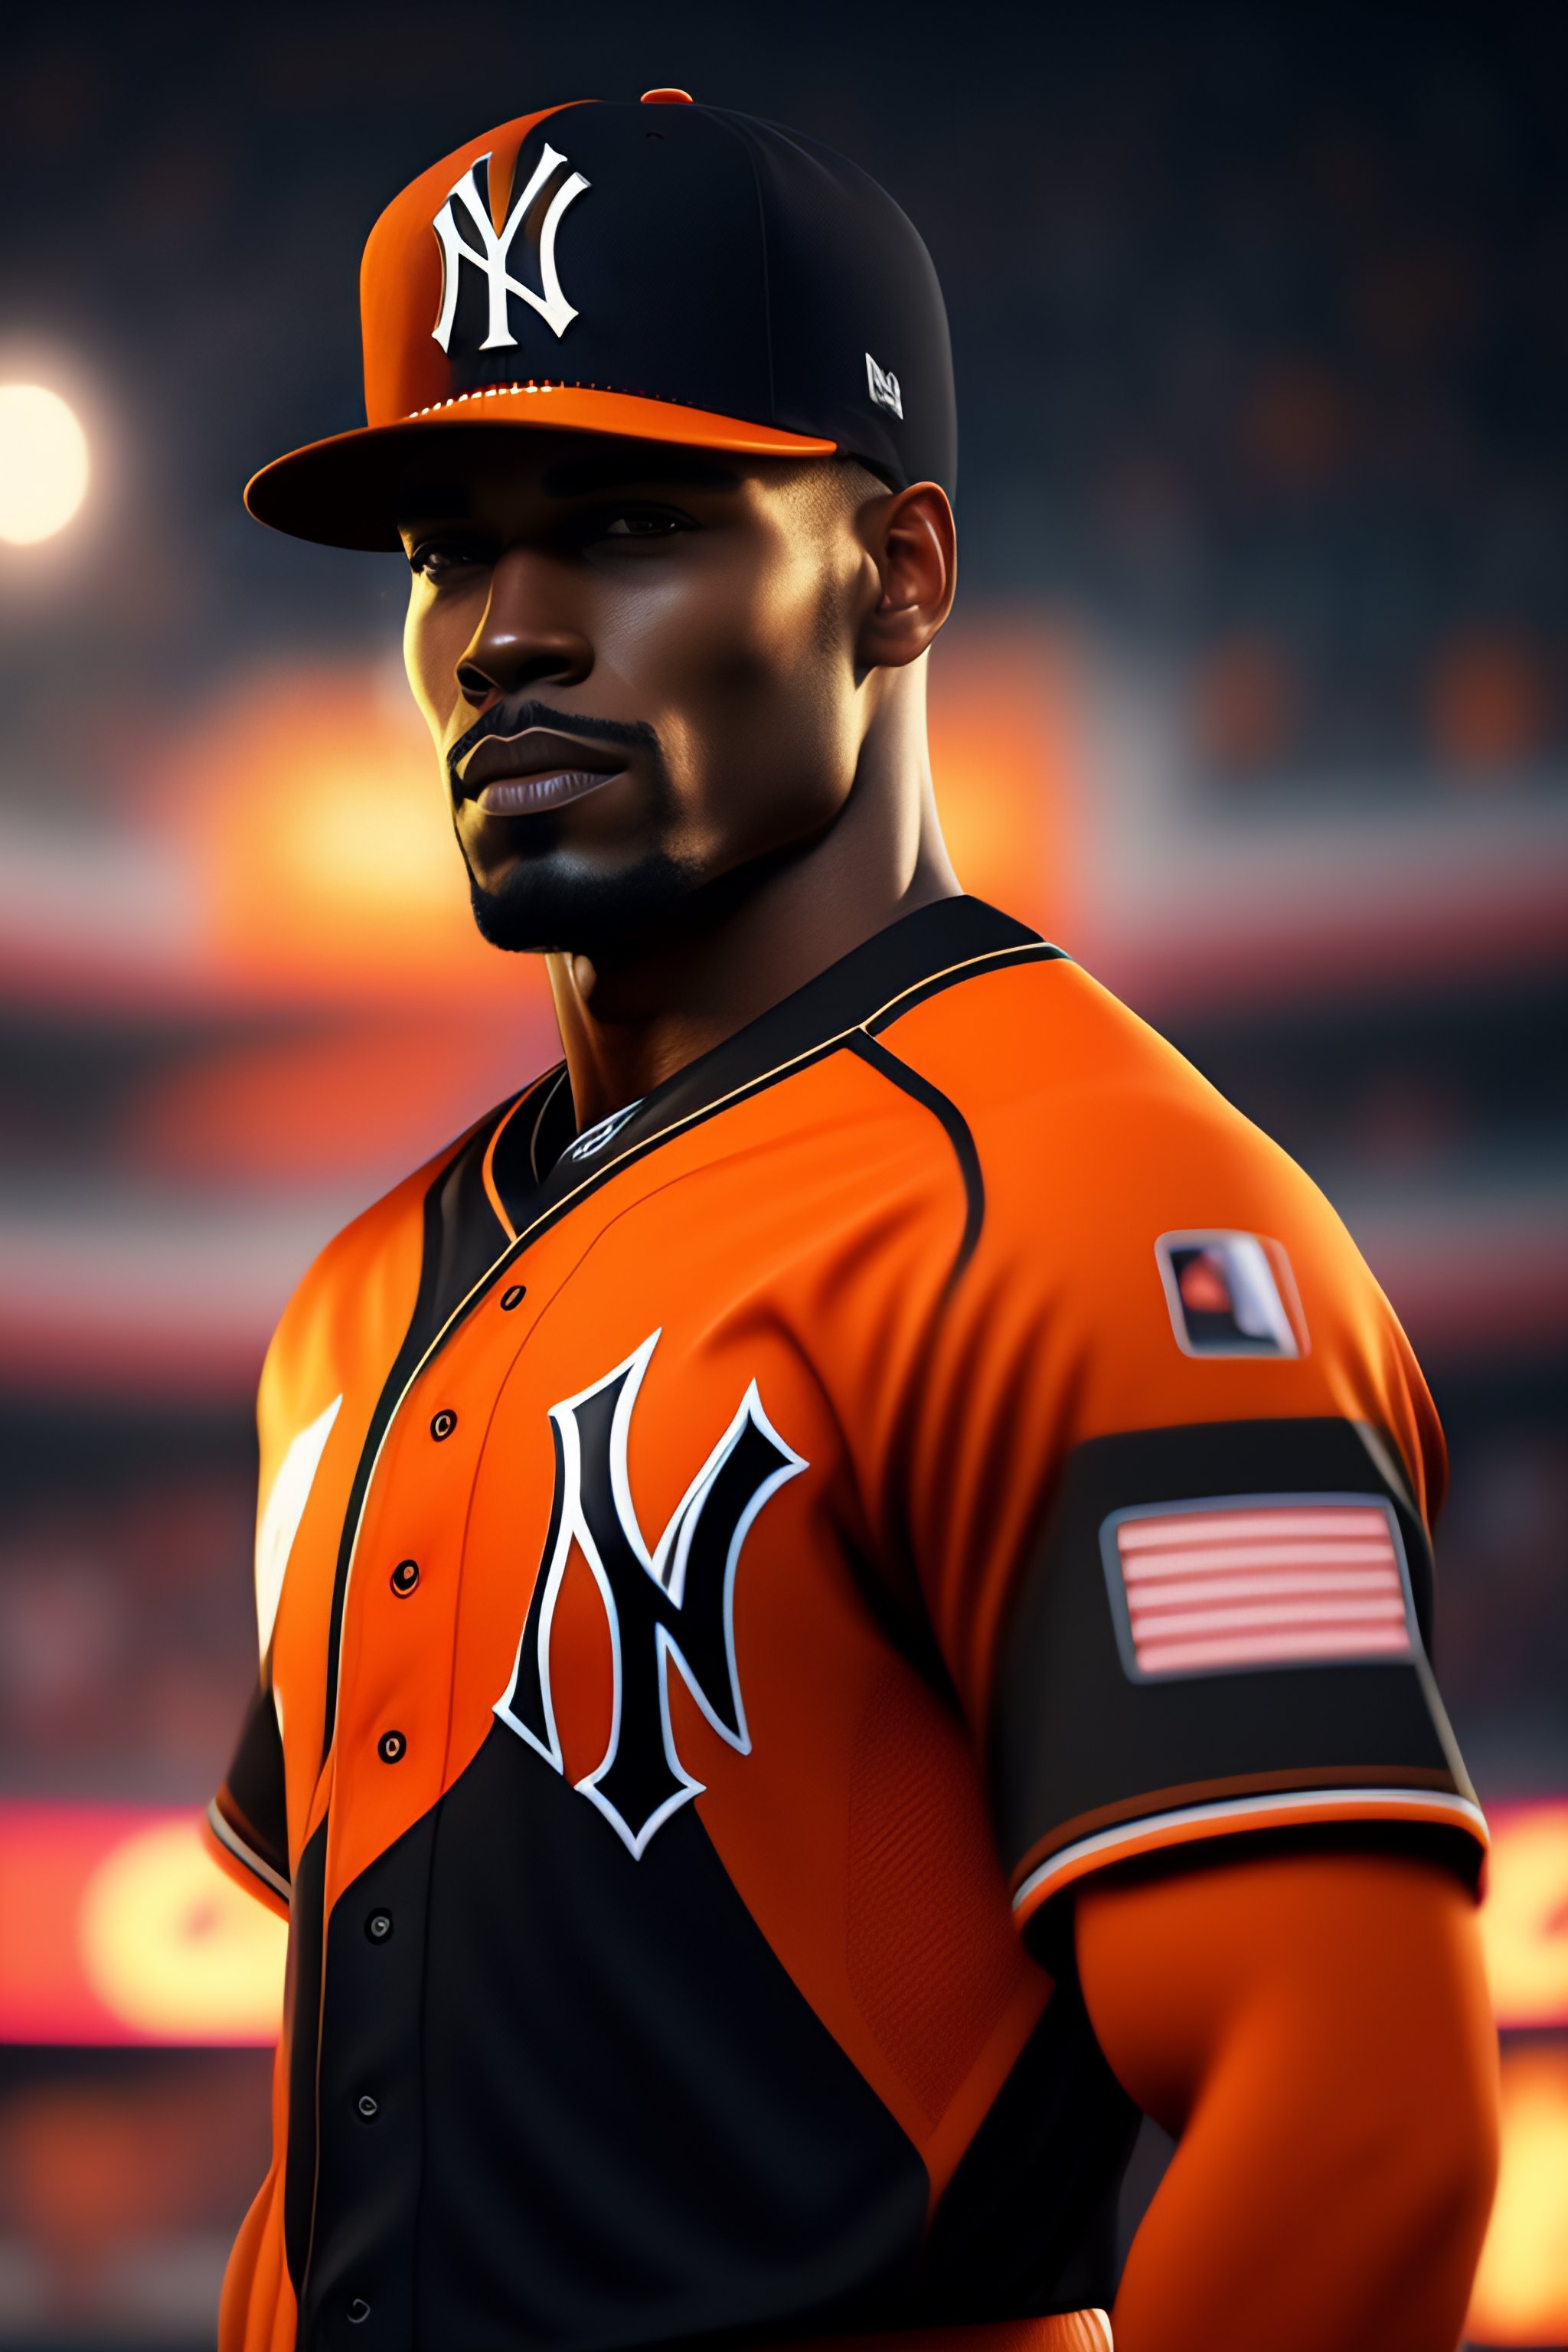 Lexica - black and whithe new york yankees uniform with black and orange  double stripes